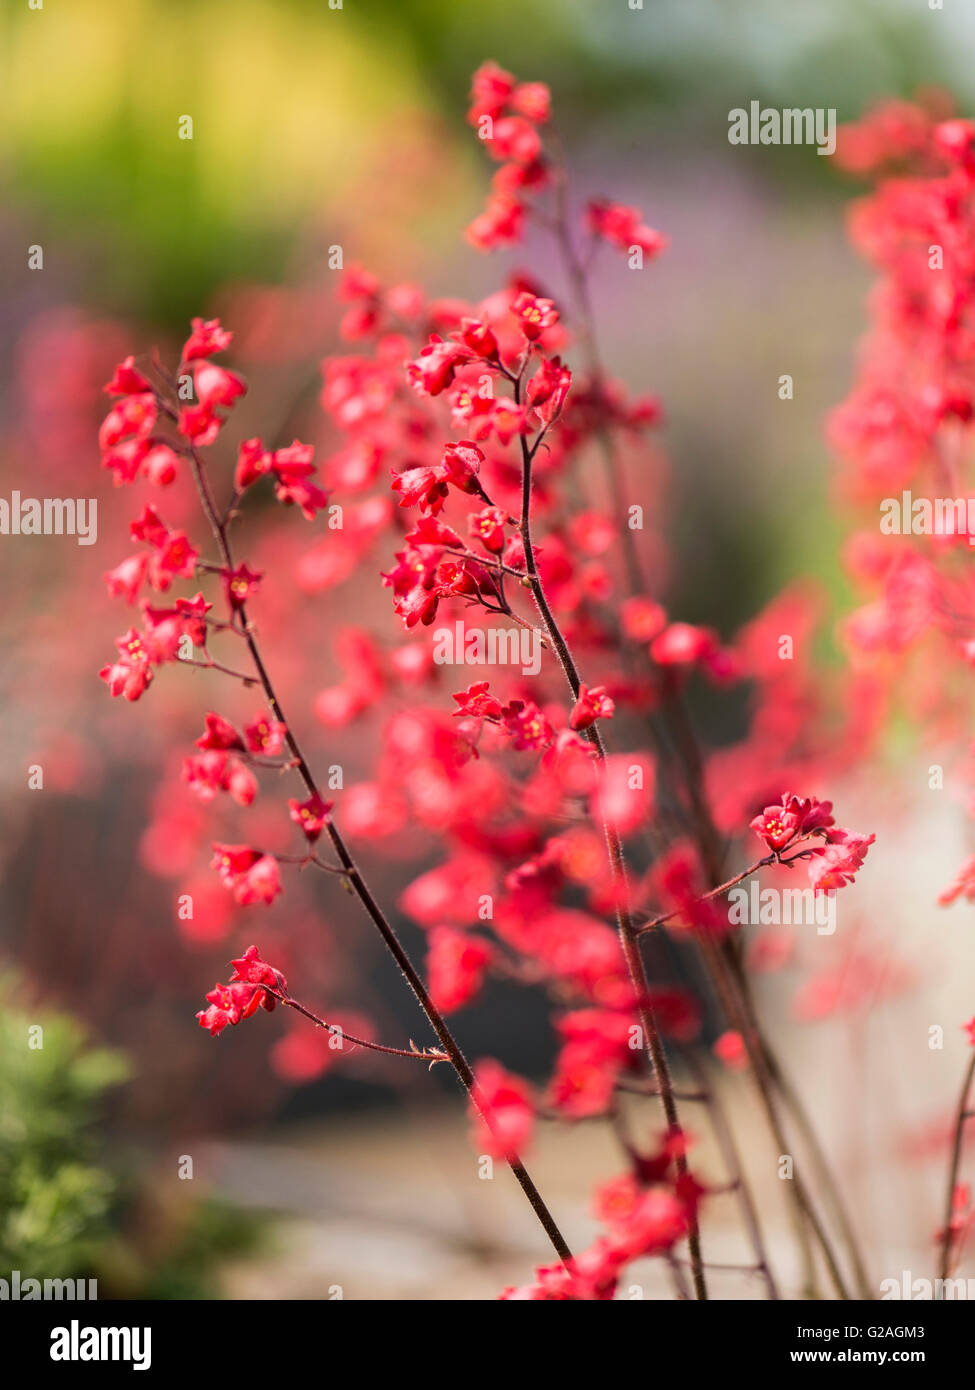 Beautiful vivid red bell shaped flowers of the Heuchera plant., isolated against background Stock Photo